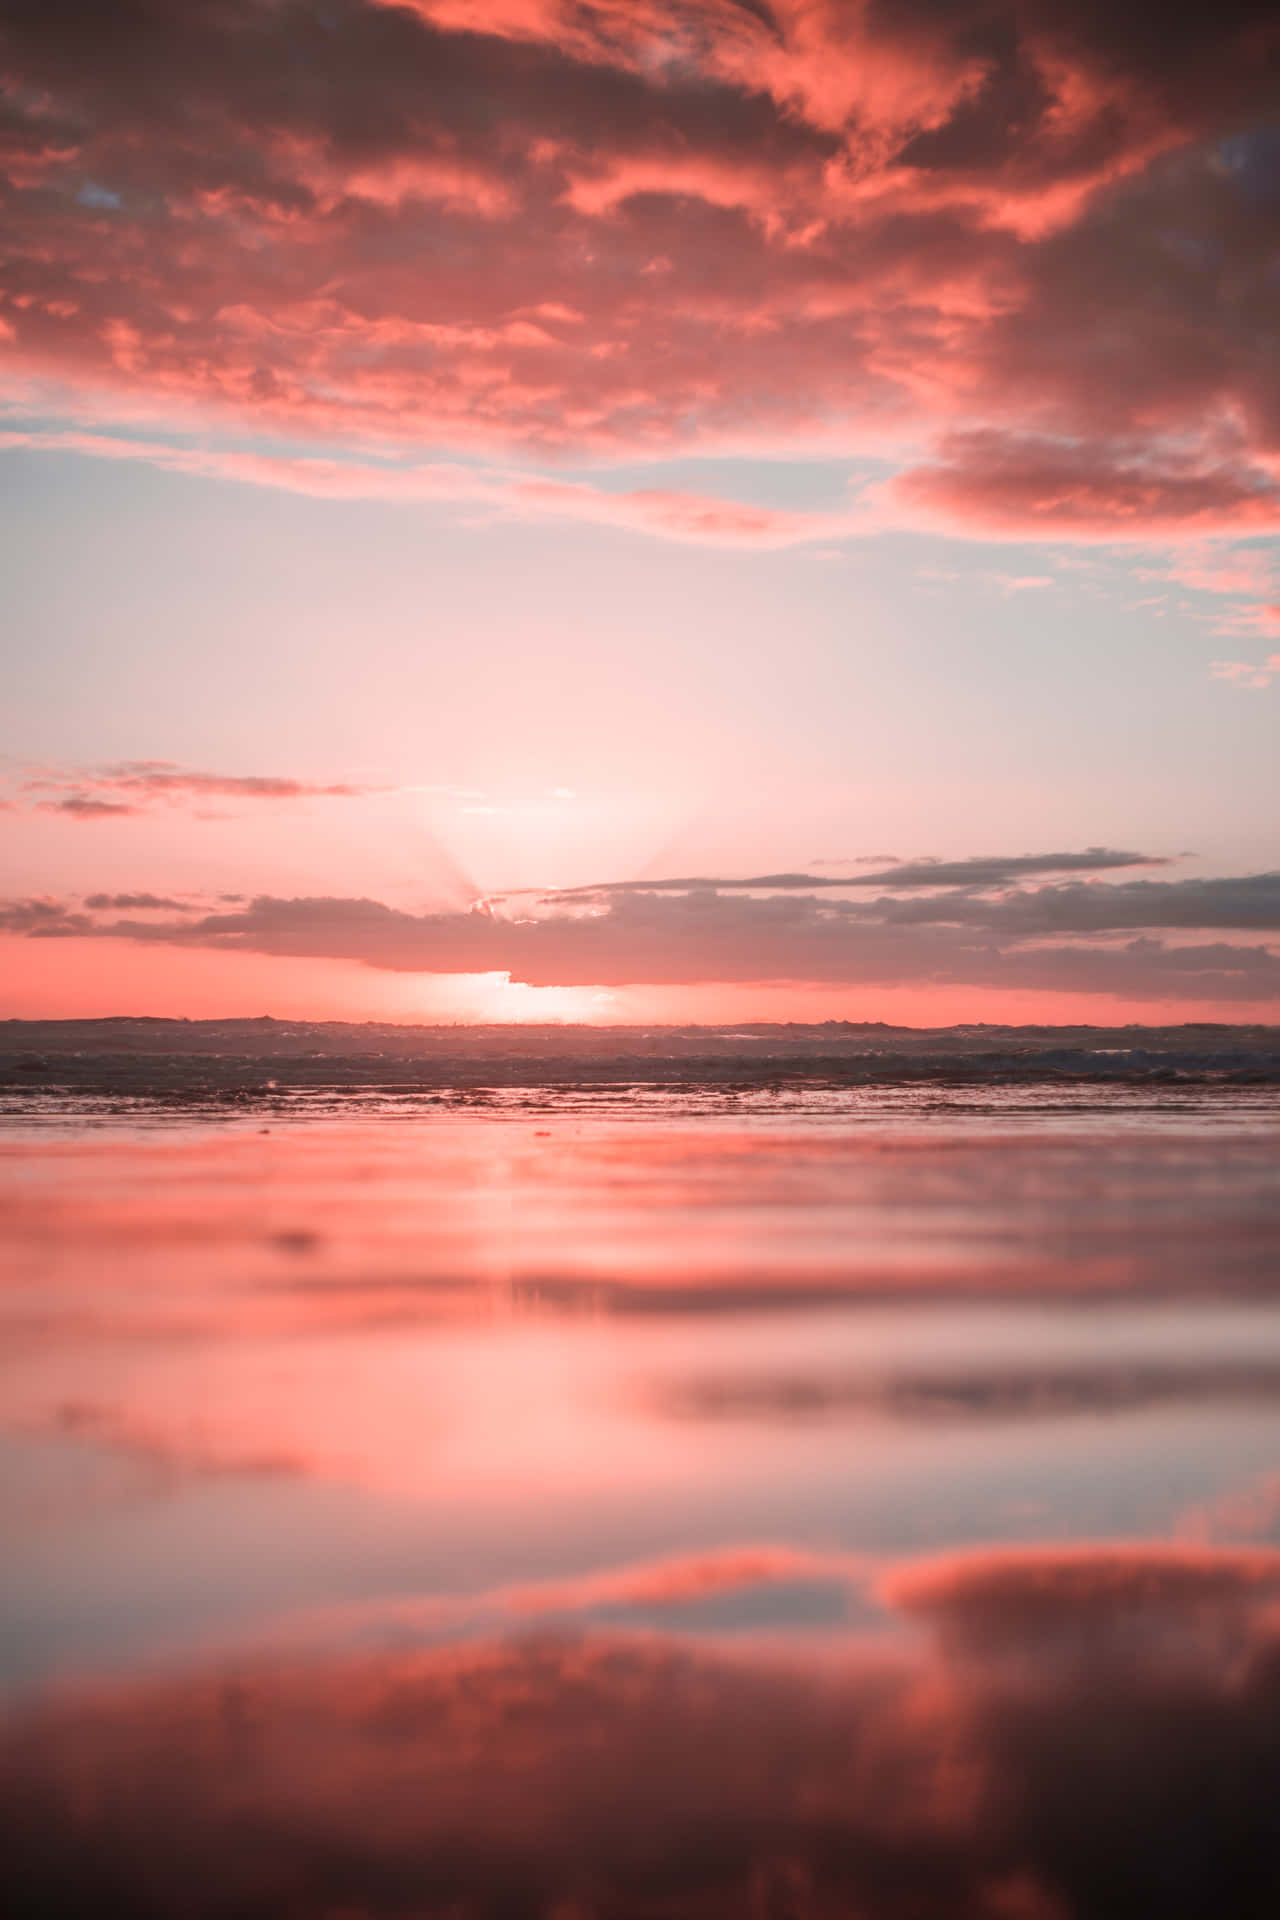 Take in the majestic beauty of a breathtaking pink beach sunset. Wallpaper